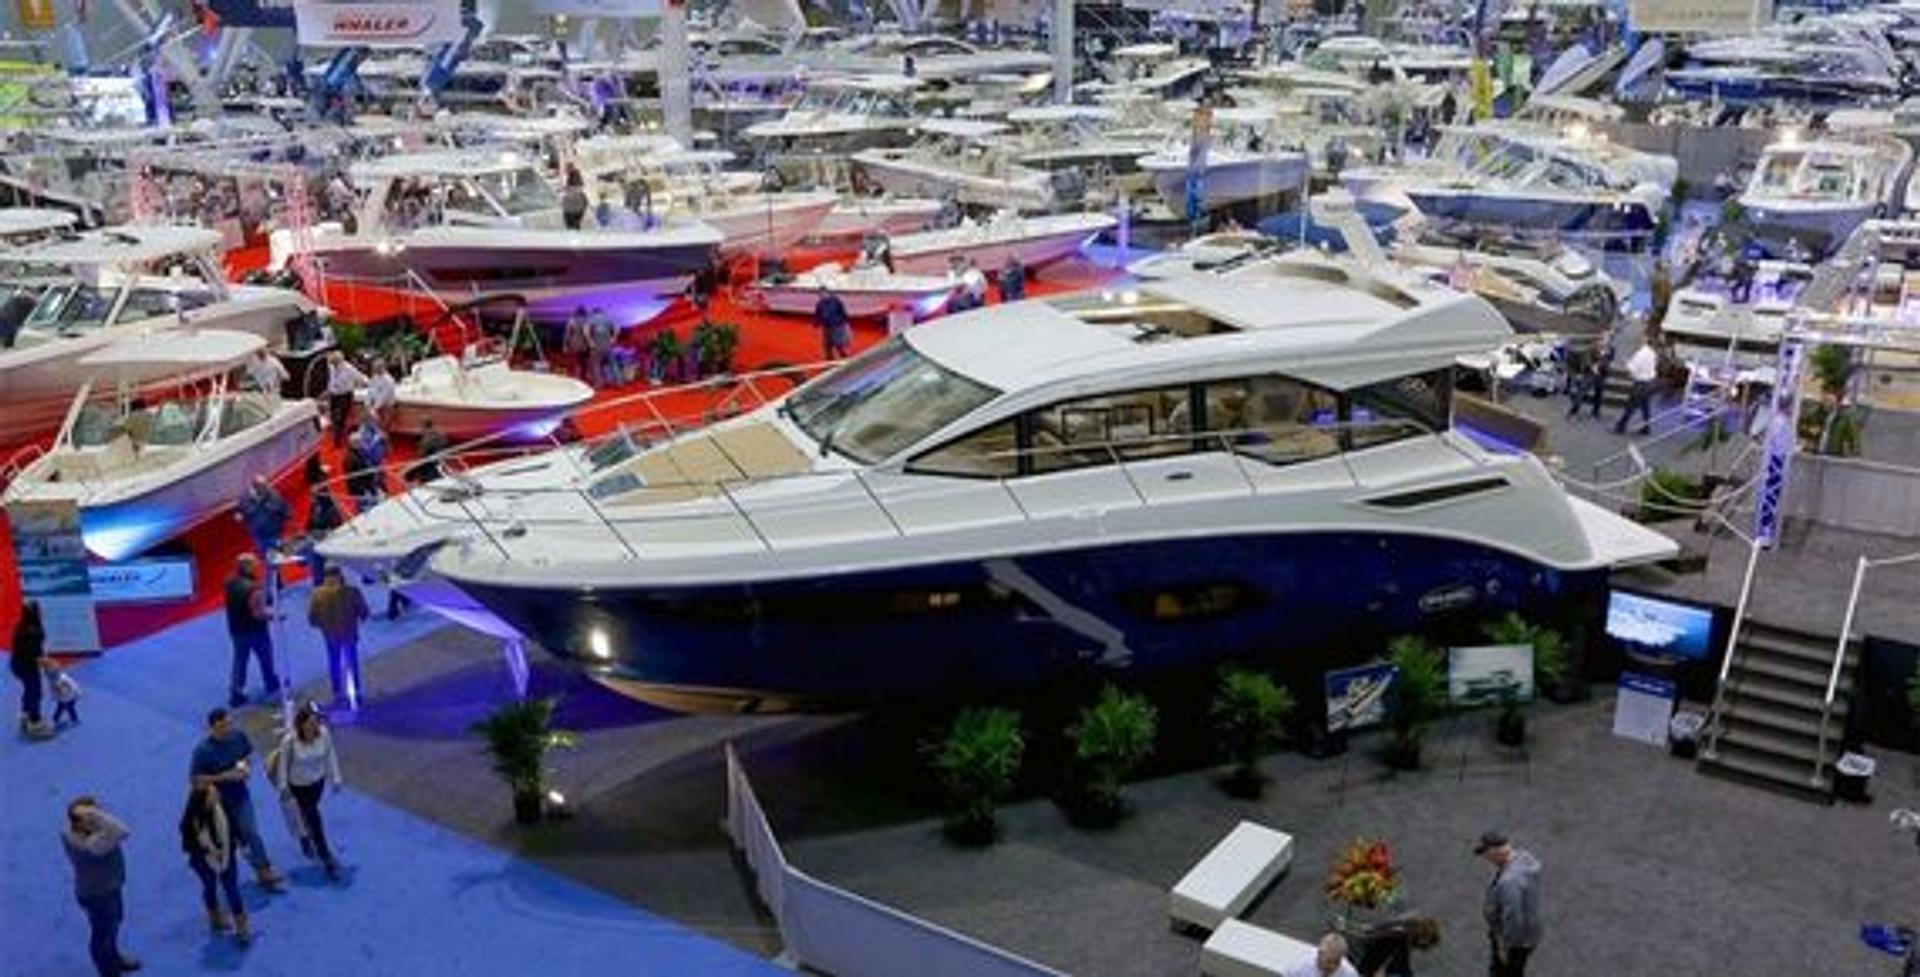 Boston Convention Center: New England Boat Show